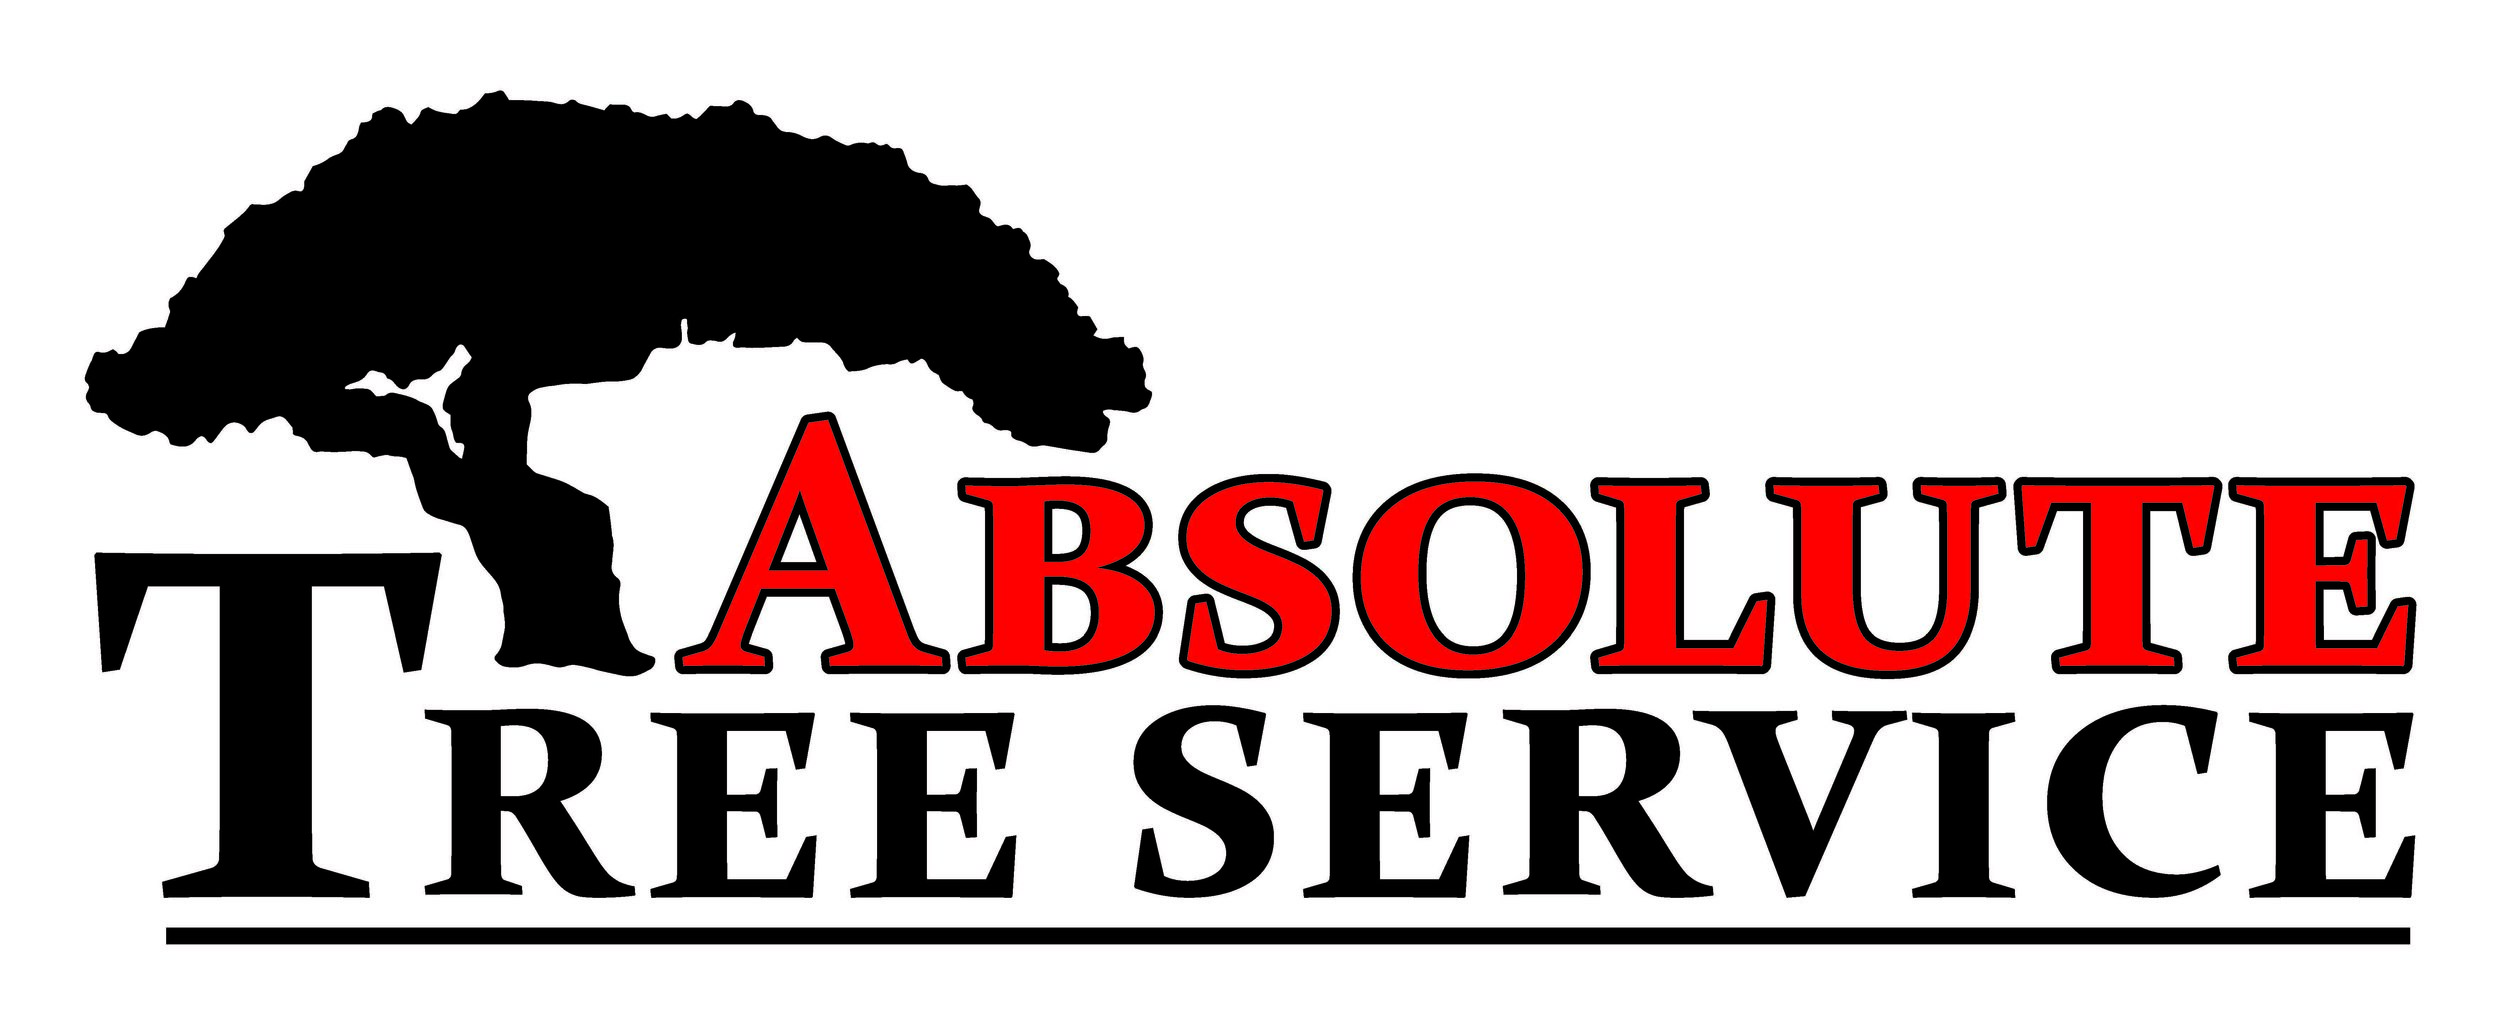 Absolute Tree Service